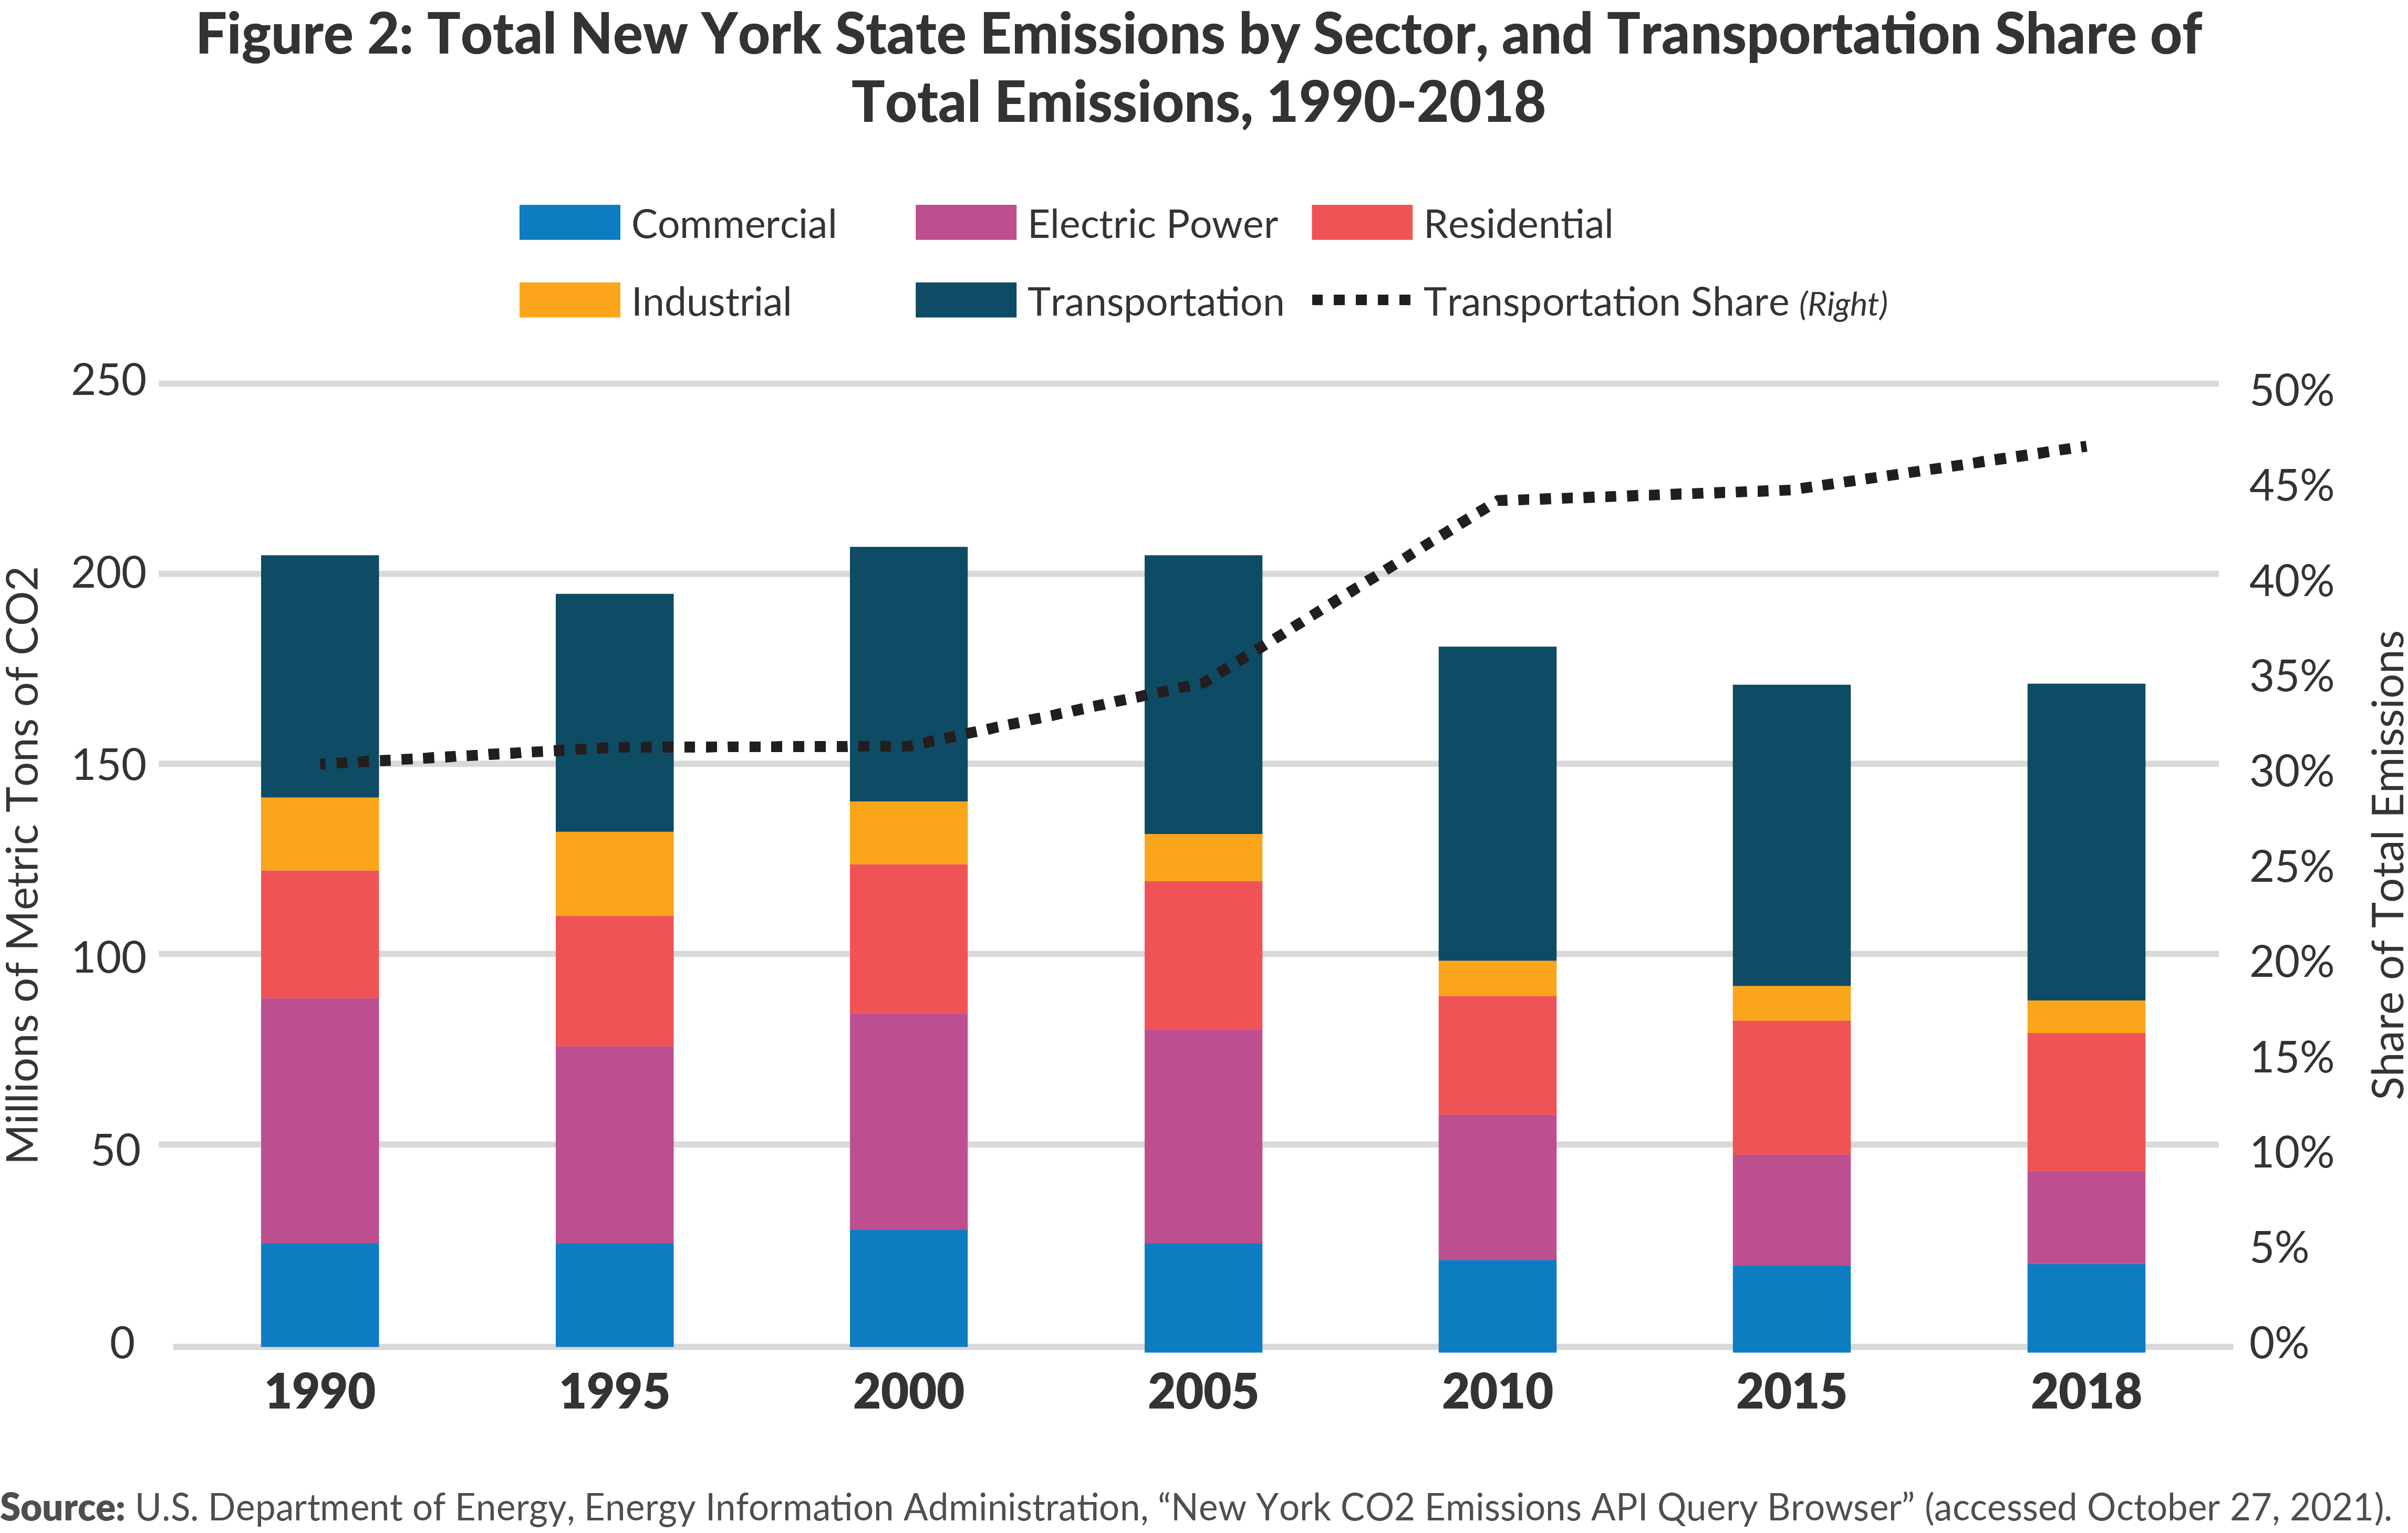 Figure 2: Total New York State Emissions by Sector, and Transportation Share of Total Emissions, 1990-2018